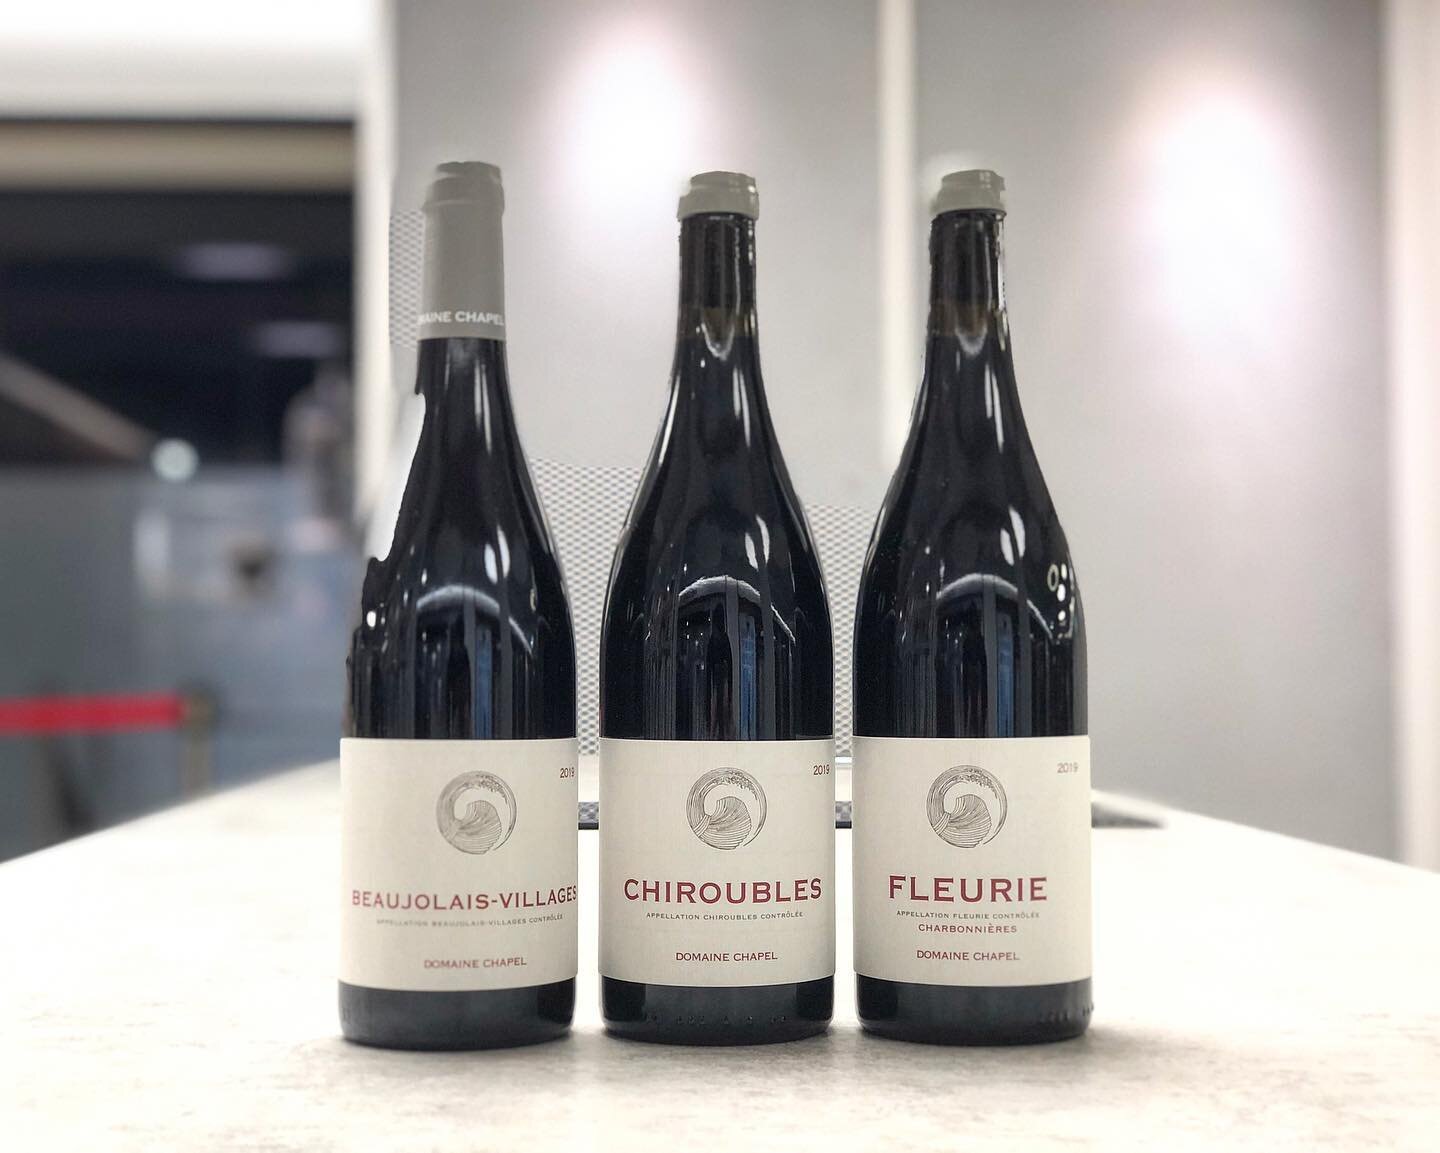 Domaine Chapel wines have slowly gained a cult following amongst the new wave of Beaujolais producers. They are crafting wines with rigorous farming and lesser extraction to achieve a level of freshness and energy in the wines. The winery is run by M